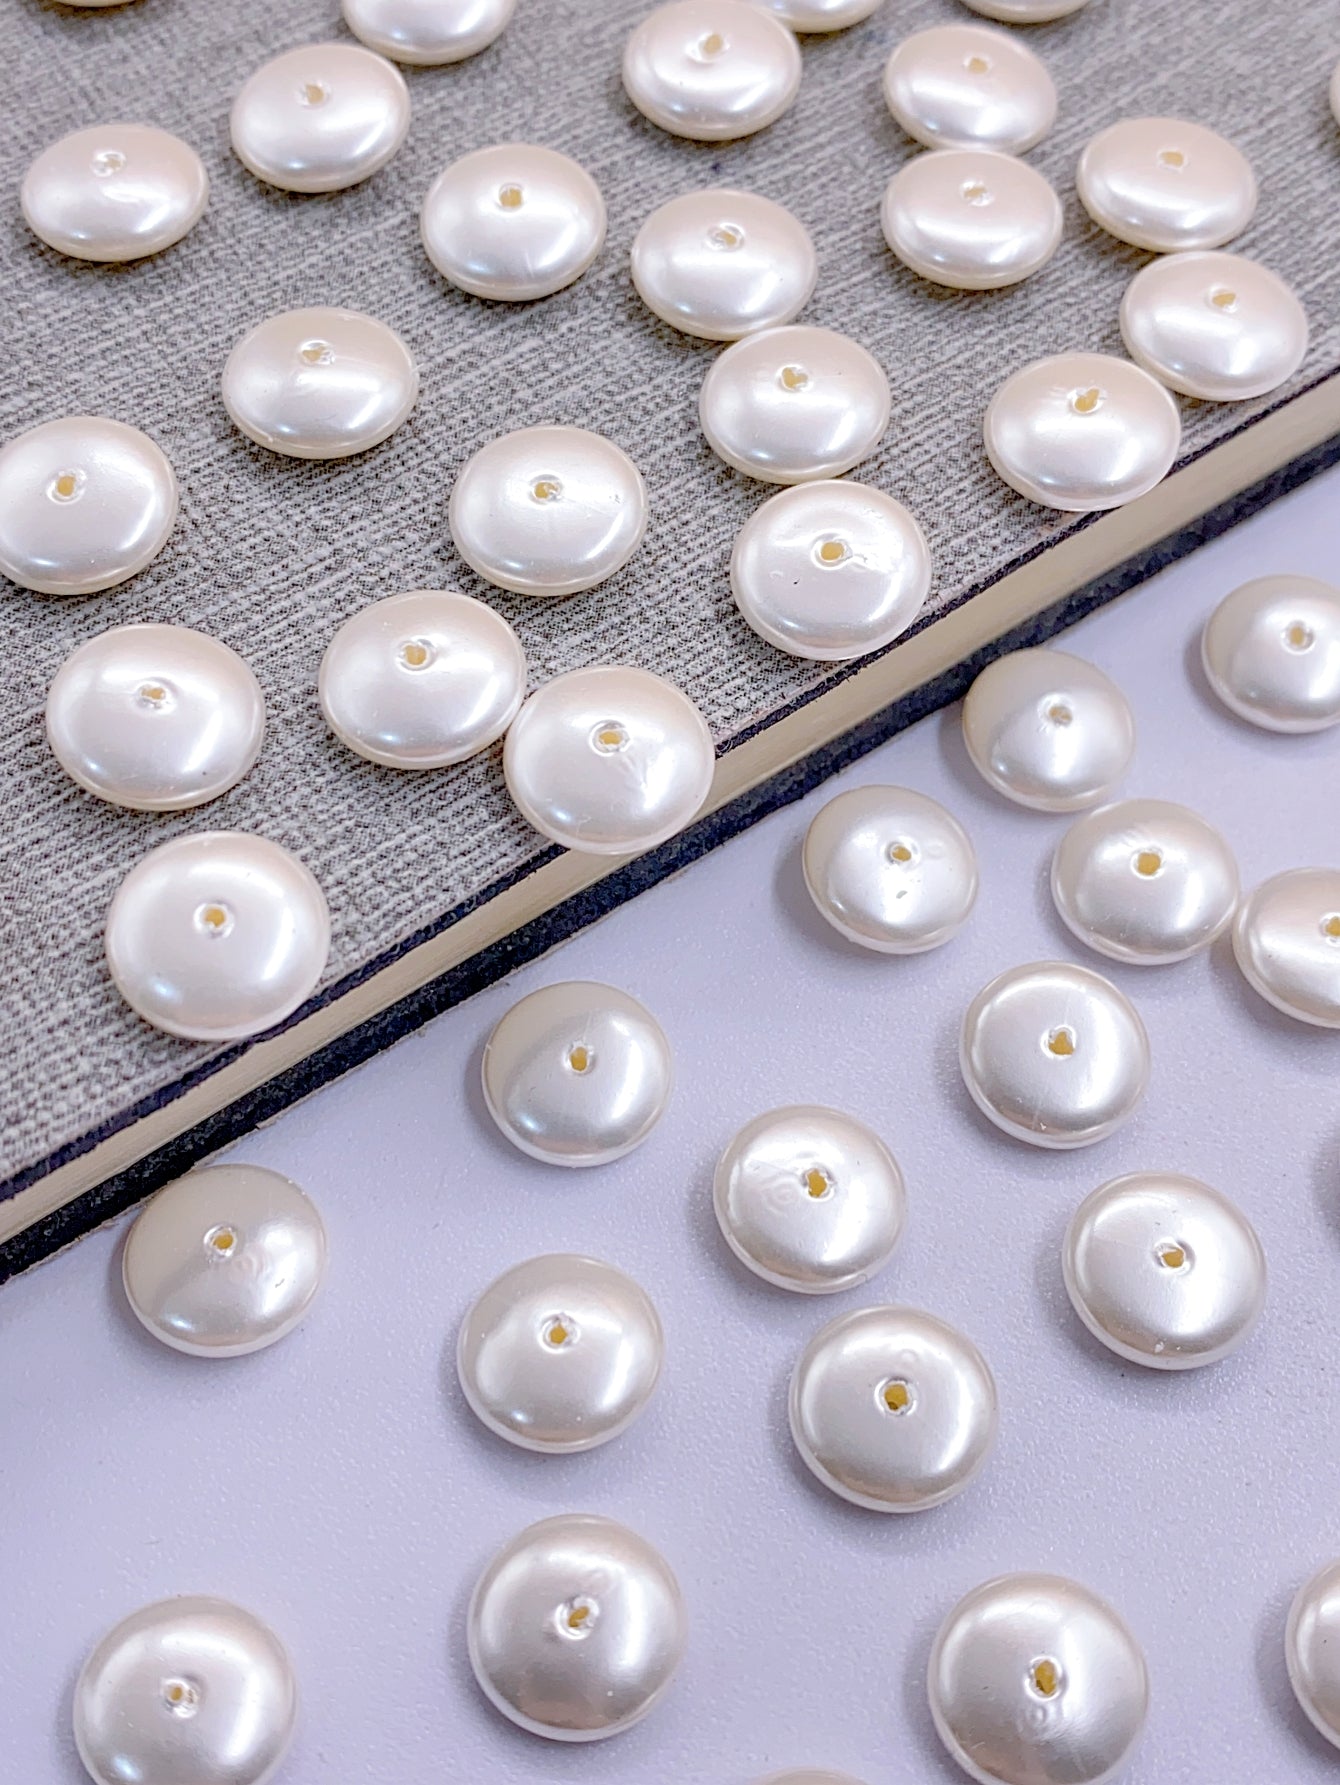 New Mabel round flat piece straight hole jewelry accessories diy clothing accessories jewelry decorative pearl